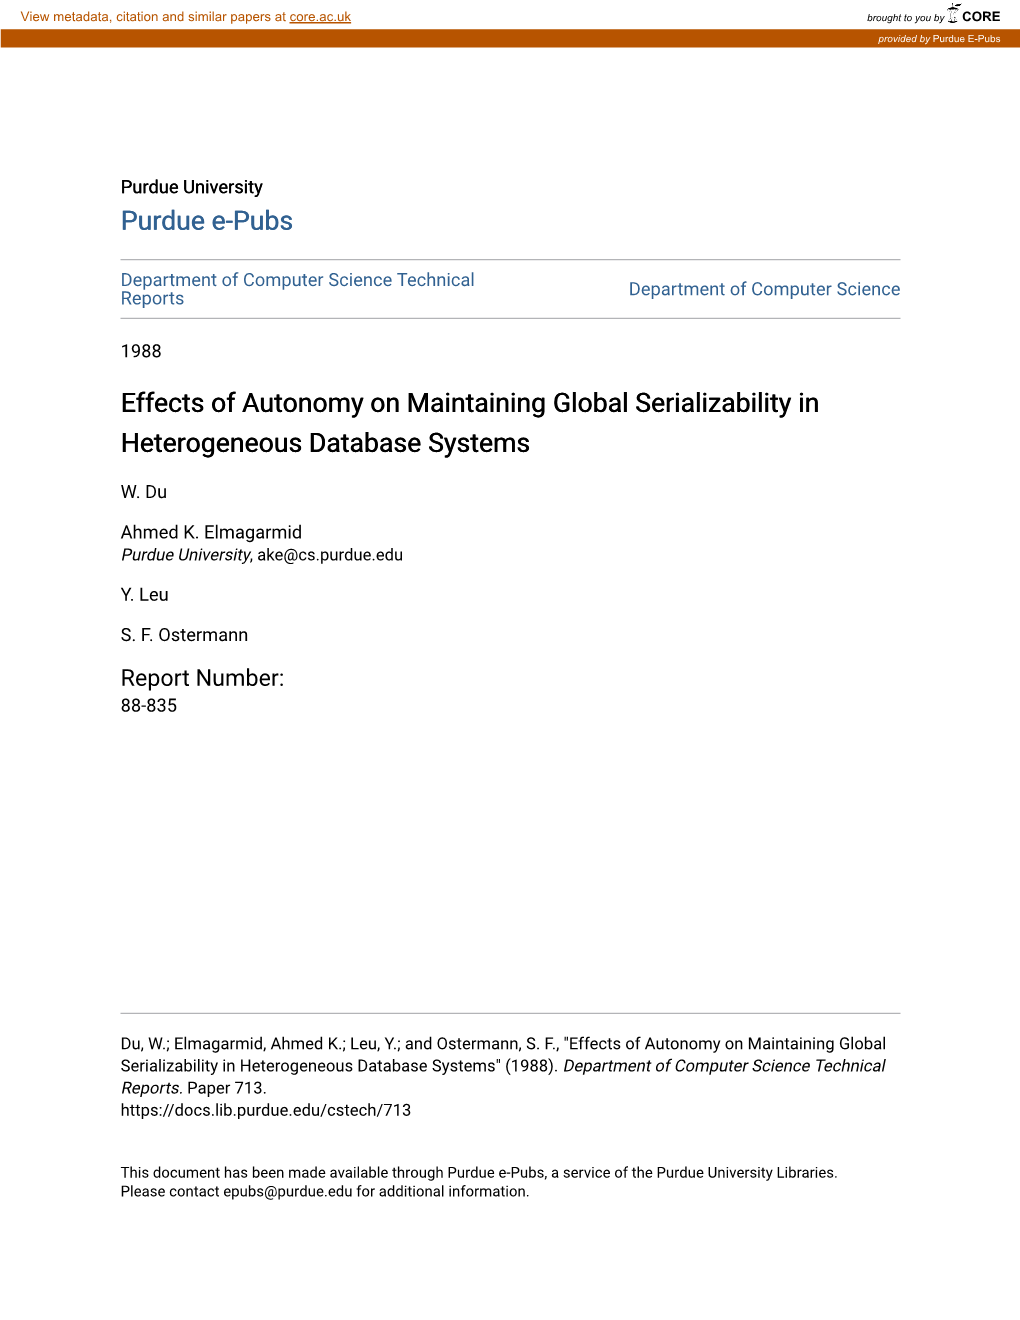 Effects of Autonomy on Maintaining Global Serializability in Heterogeneous Database Systems